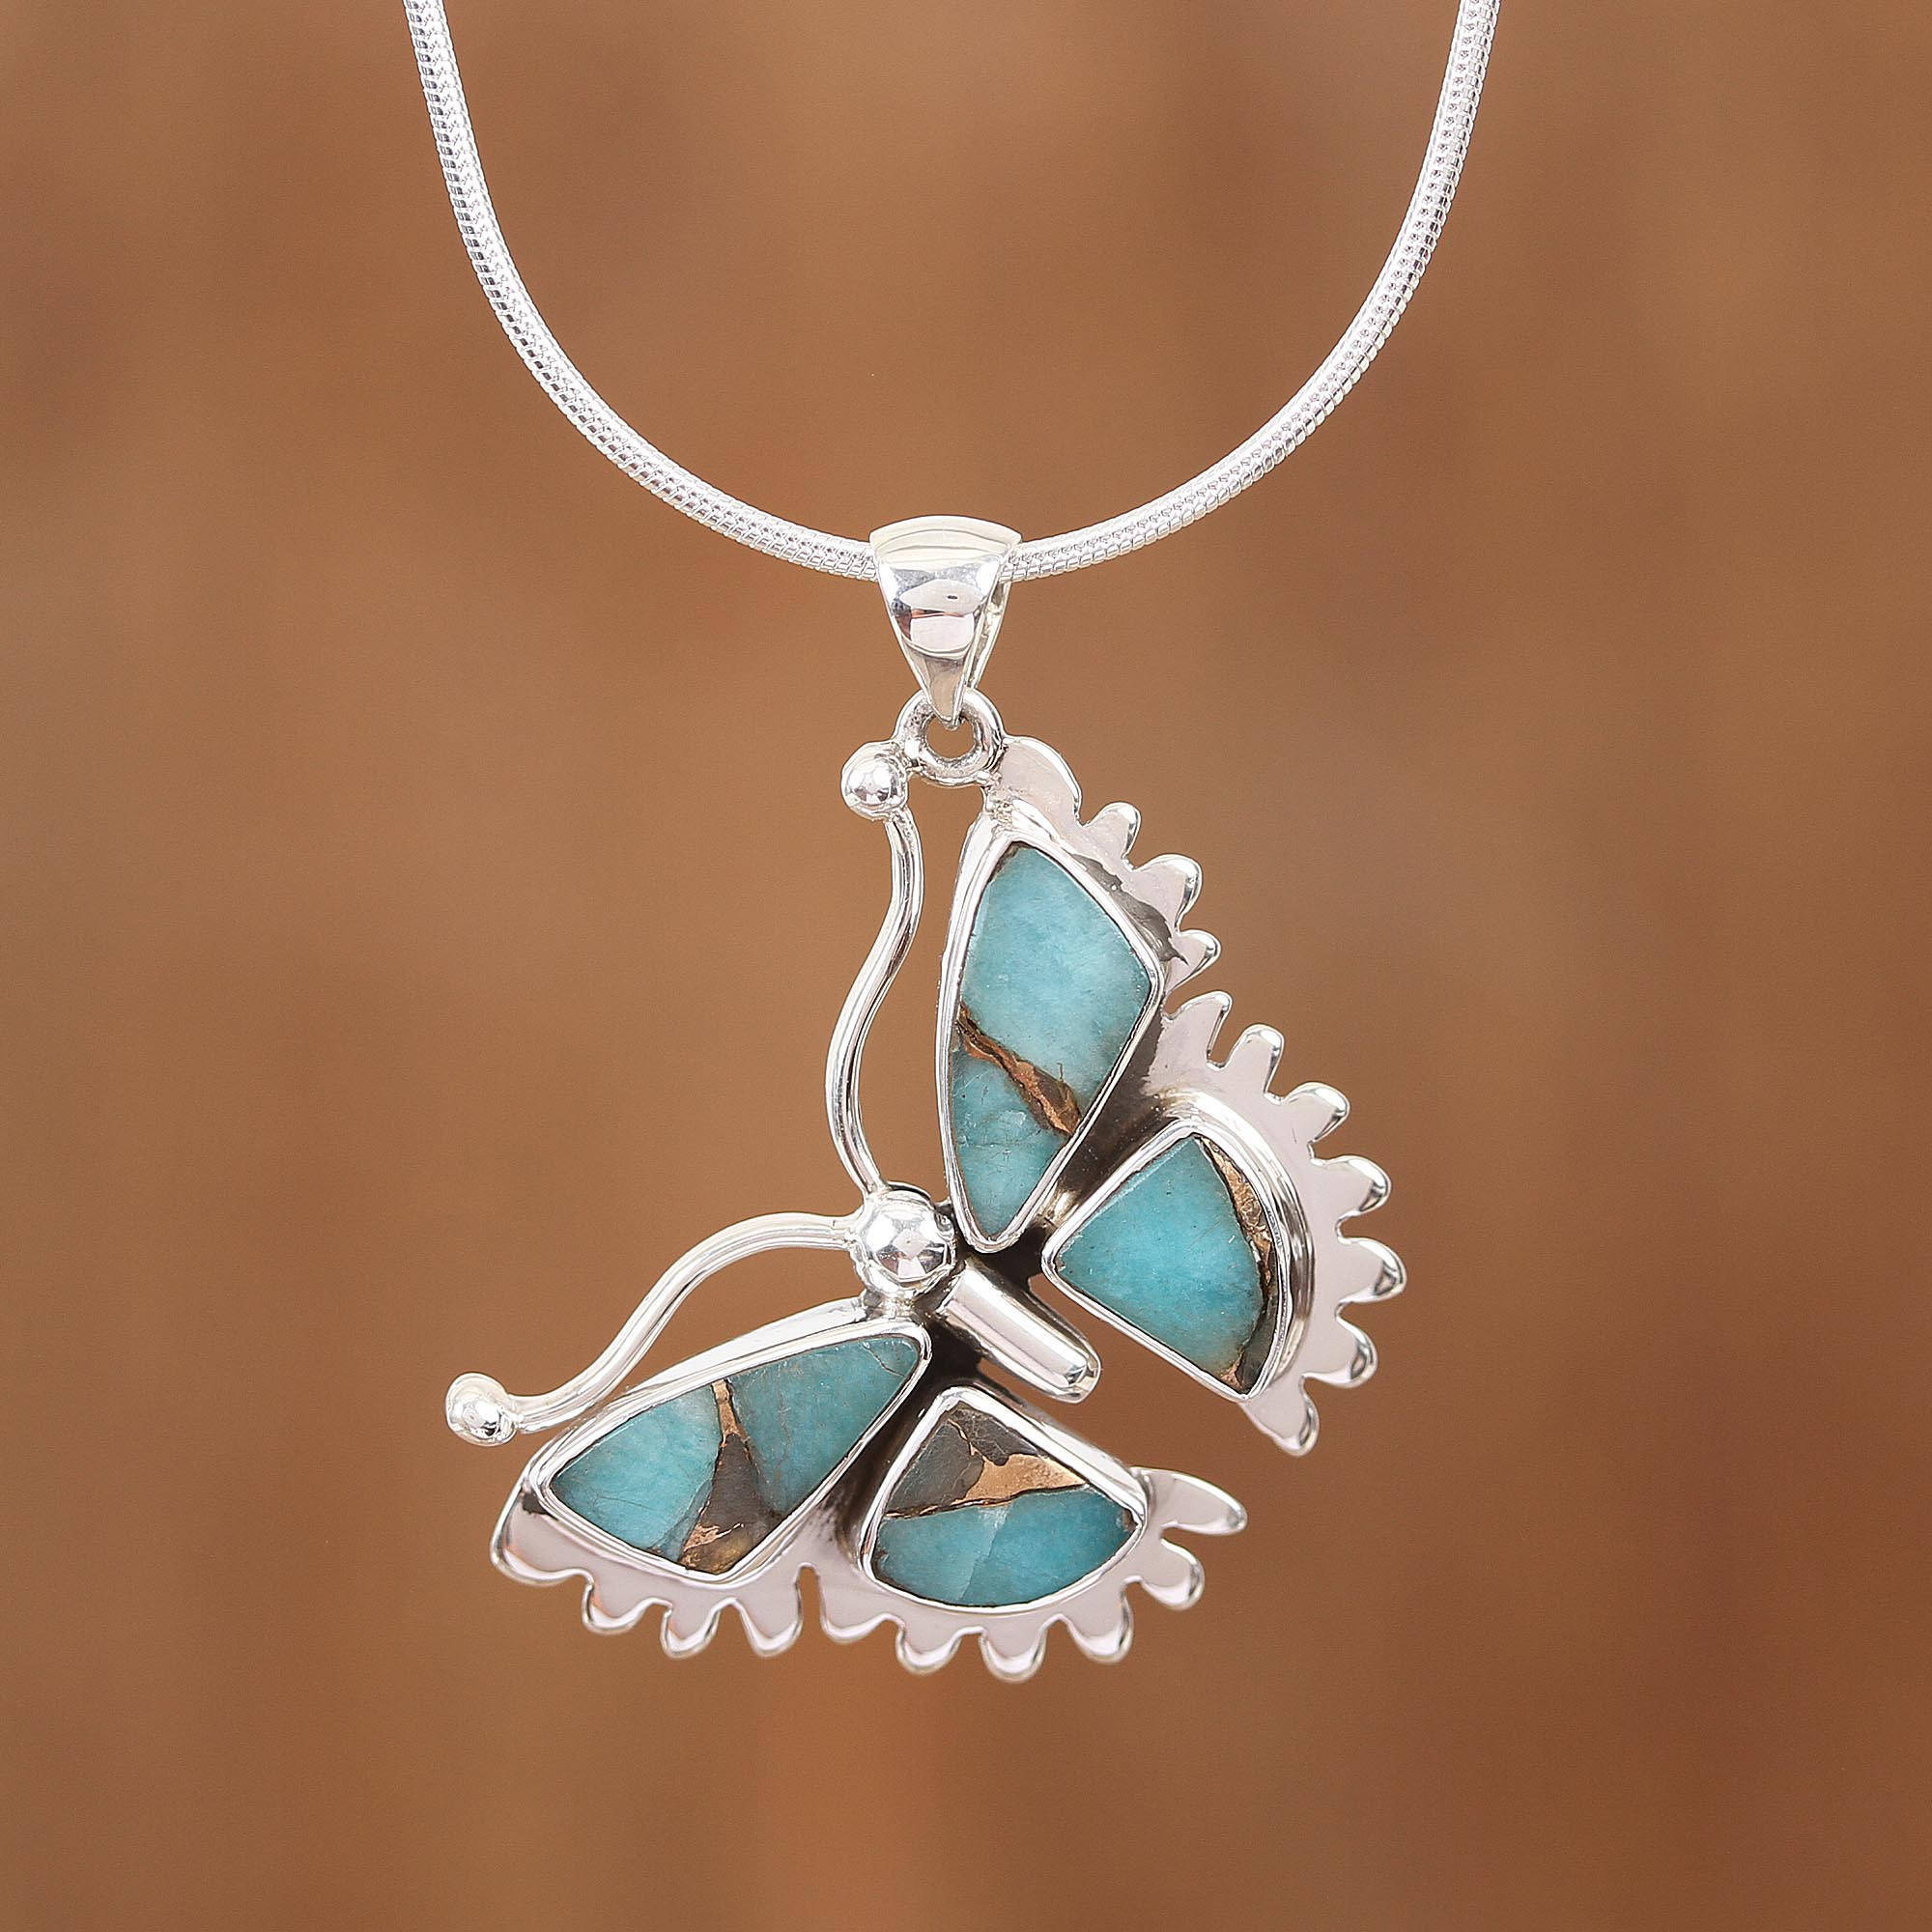 mysilverworld 925 Sterling Silver Turquoise Stone Butterfly Necklace 